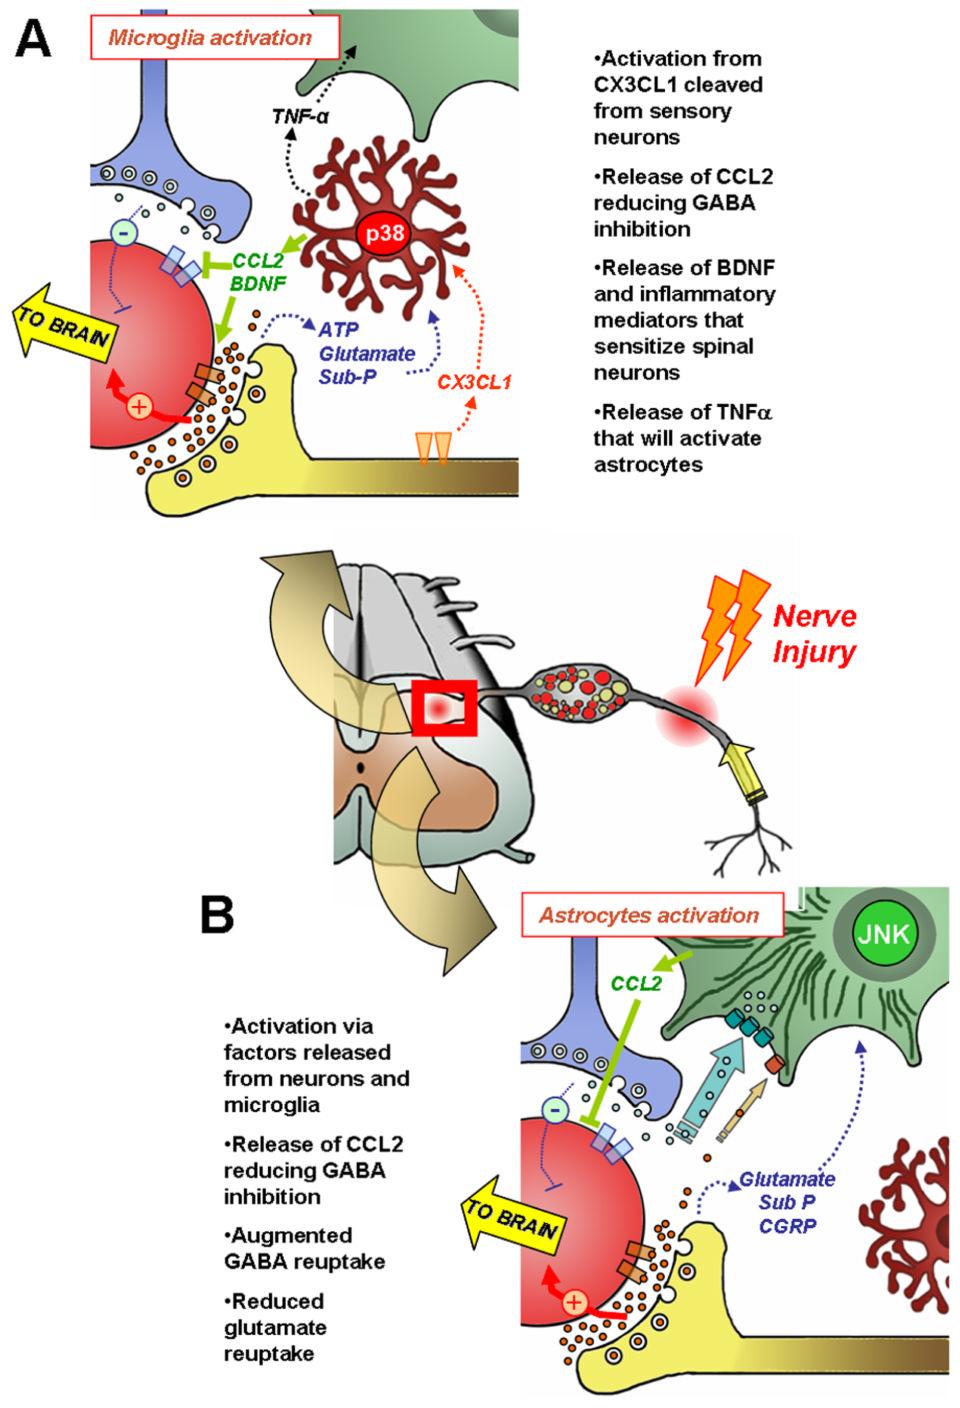 GOSSELIN et al. Page 16 Figure 4. Schematic illustartion of microglial (A) and astrocytic (B) events taking place in the spinal cord in neuropathic pain.